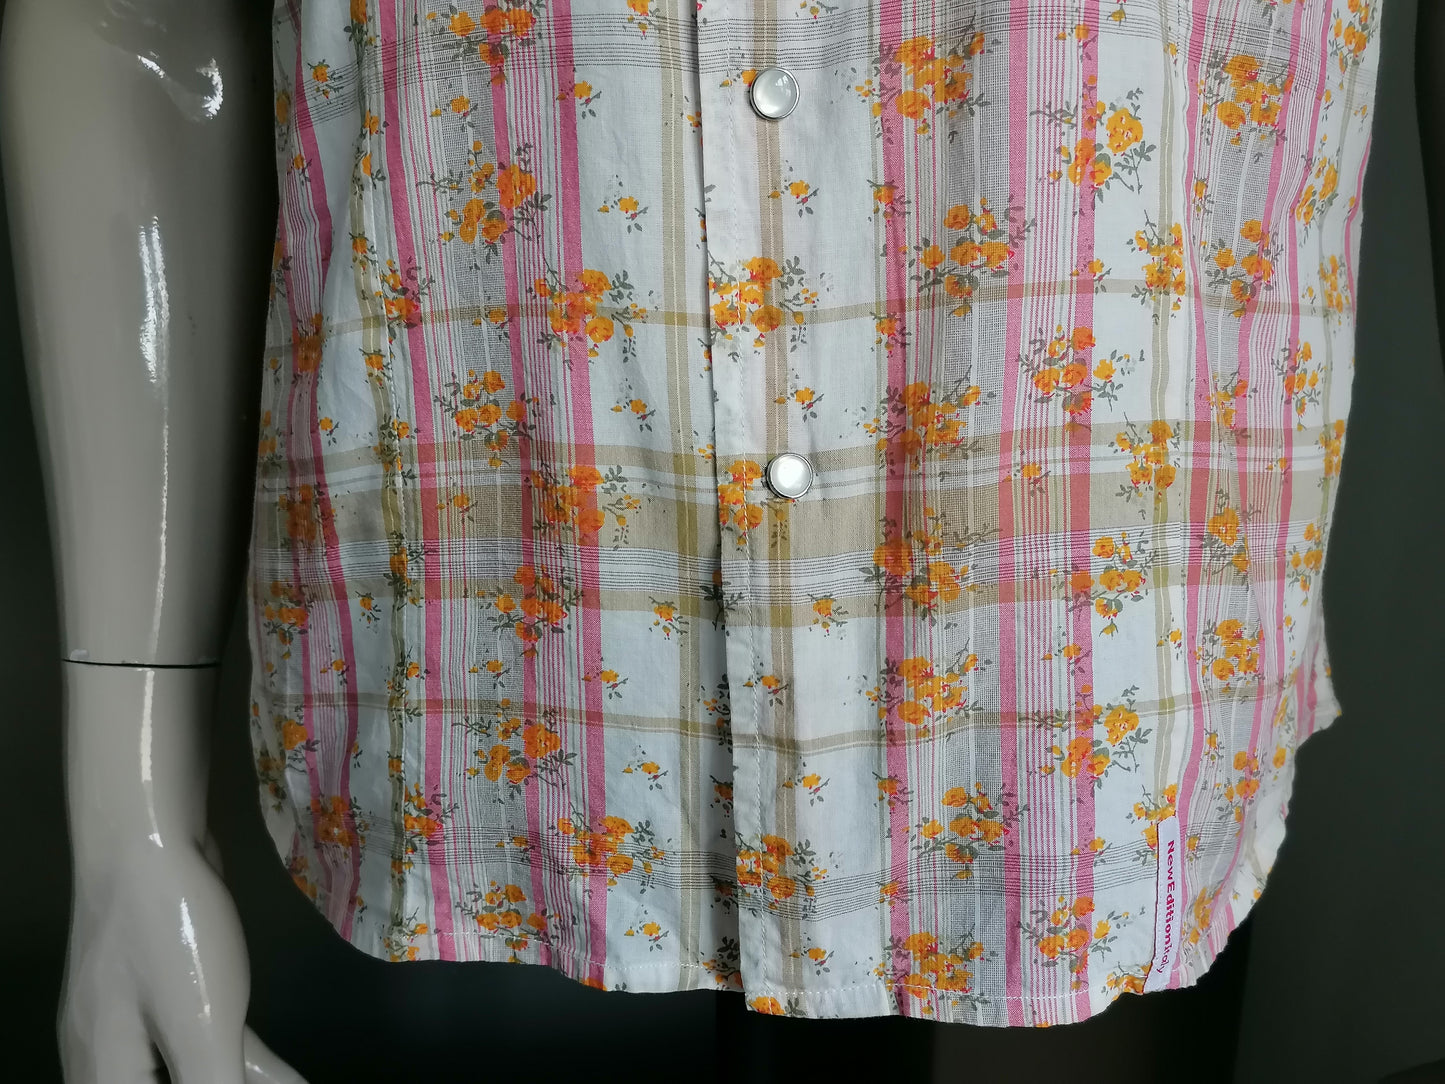 New Edition Shirt short sleeve with press studs. Orange pink beige flowers print. Size M.